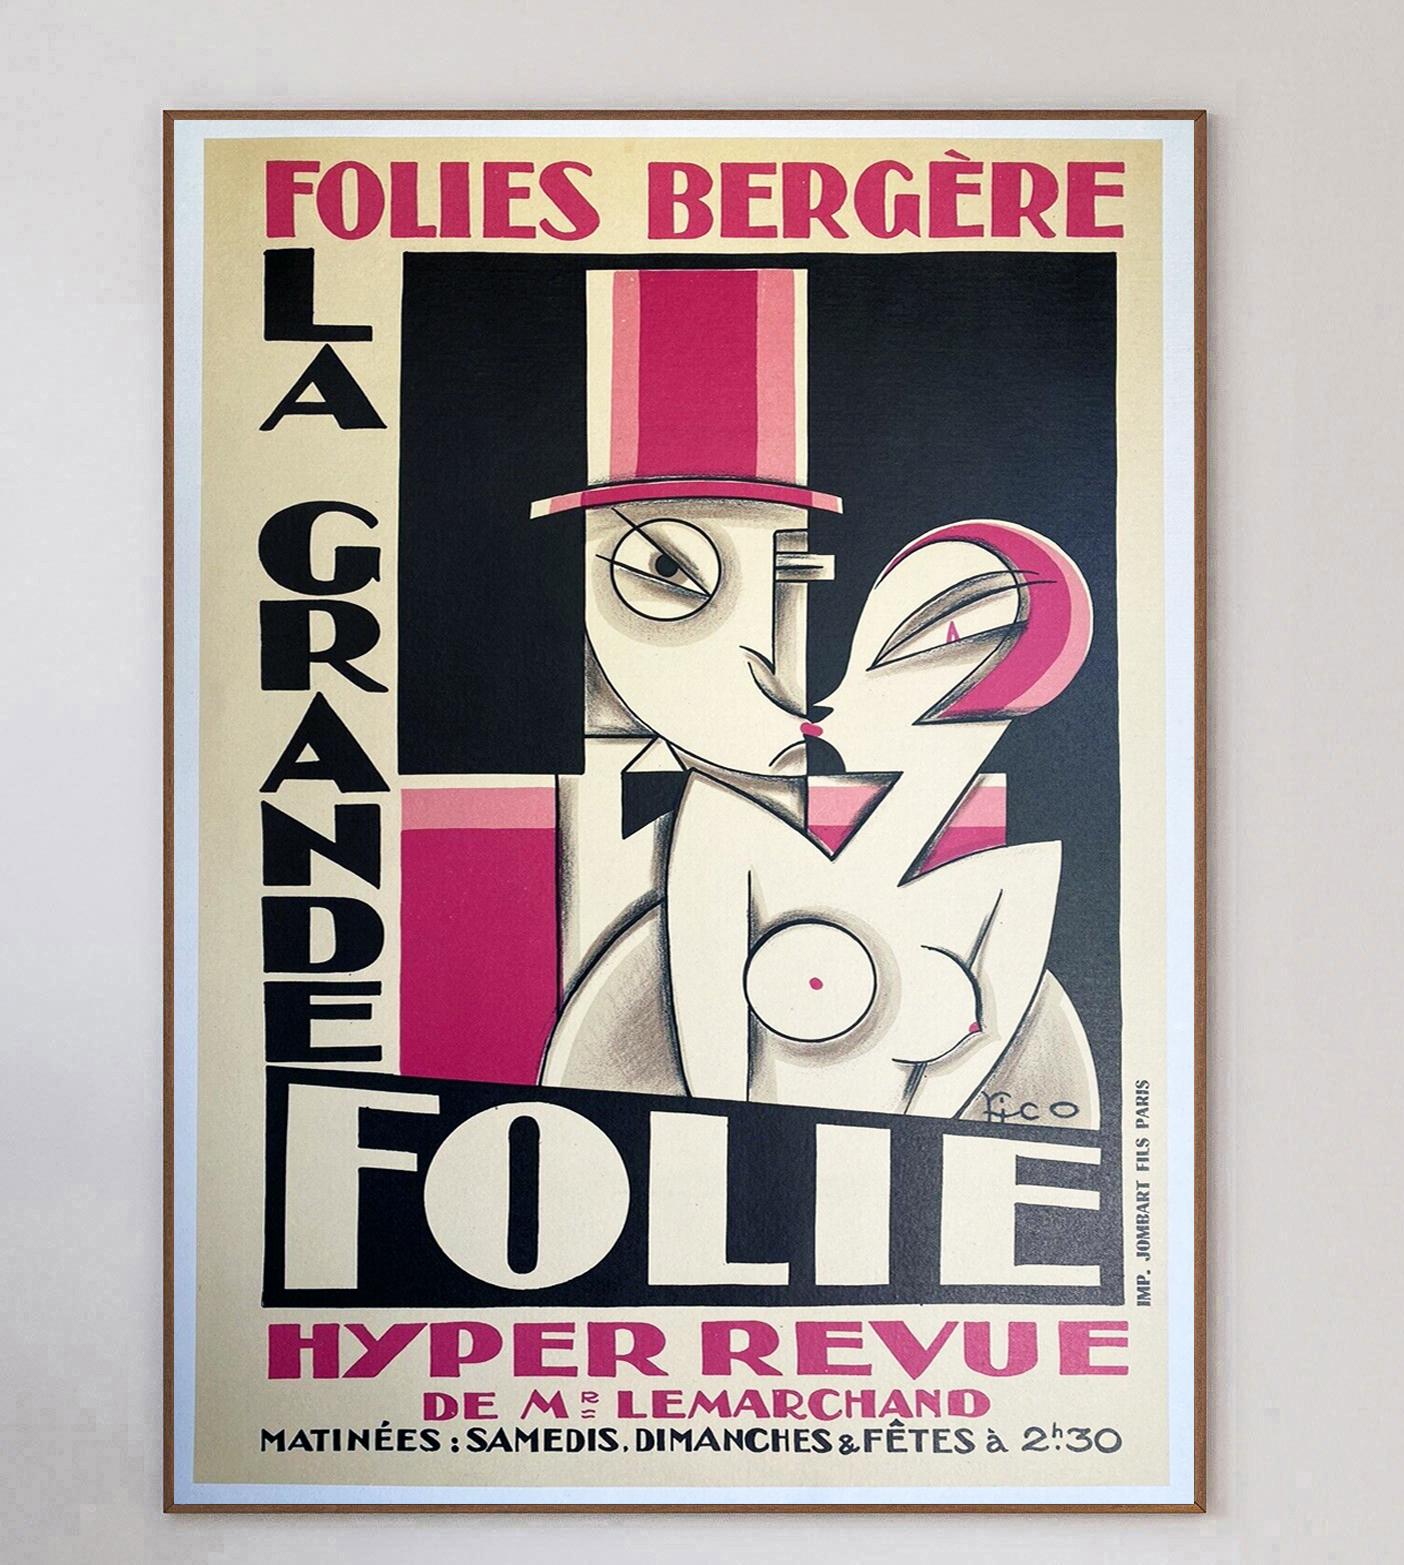 Brilliant Art Deco poster from 1930 with artwork from Maurice Picauld better known as Pico. Reading 